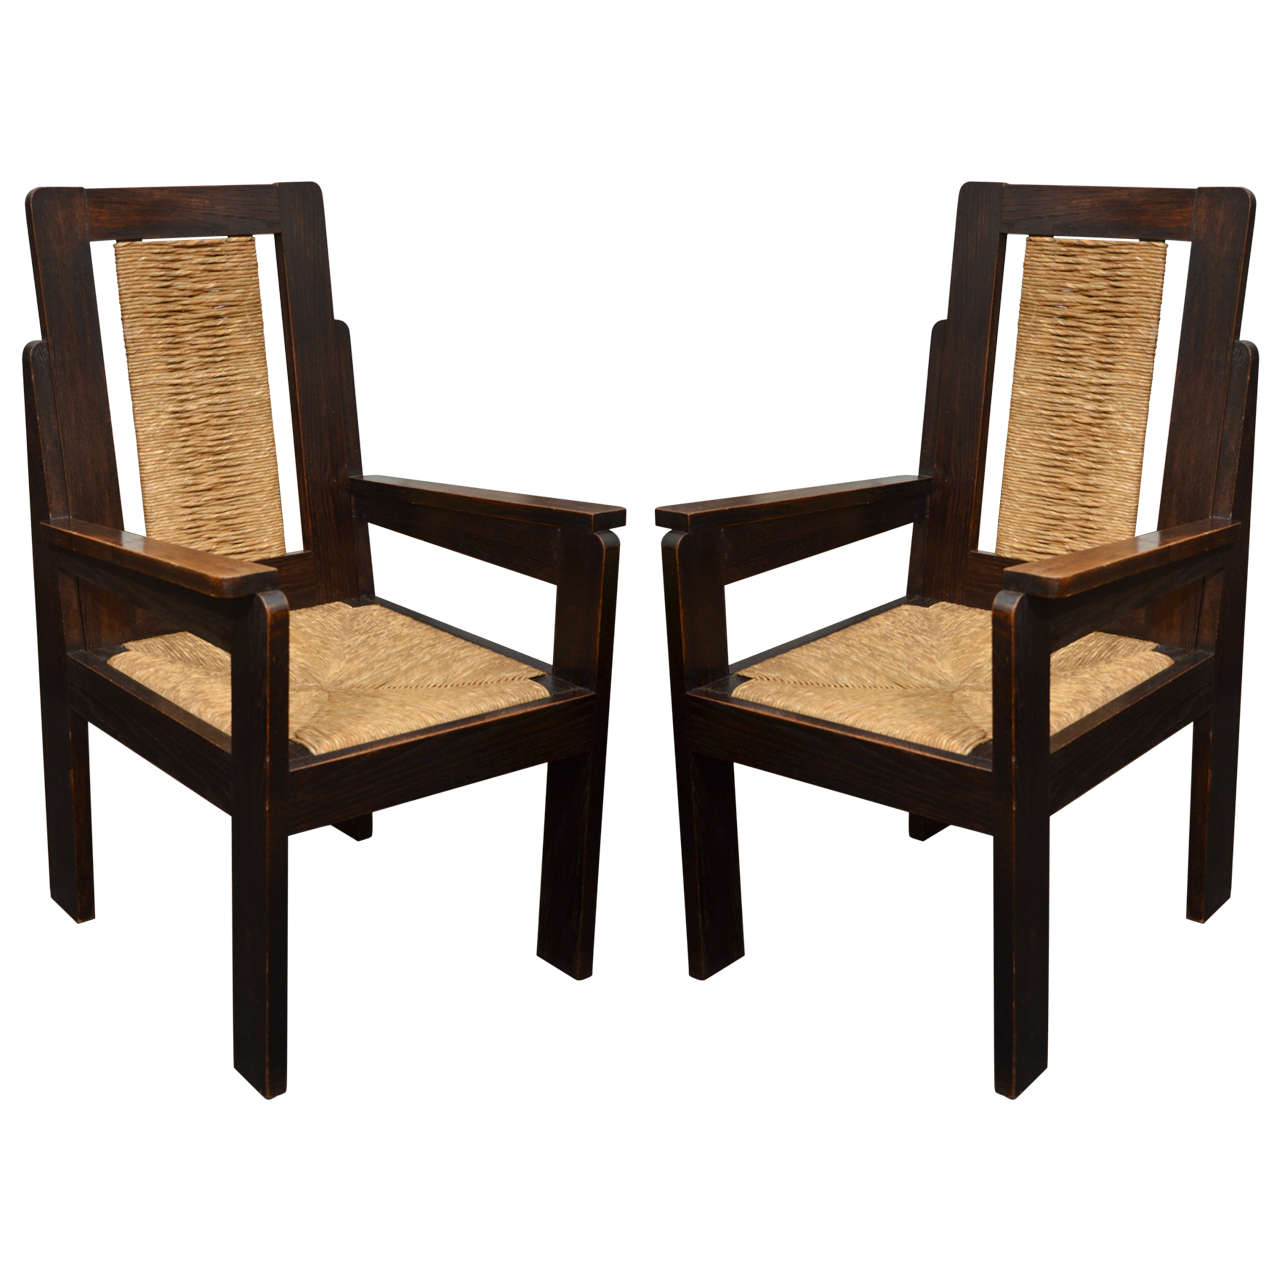 Pair of Wooden Armchairs with Rush Seats by Sornay